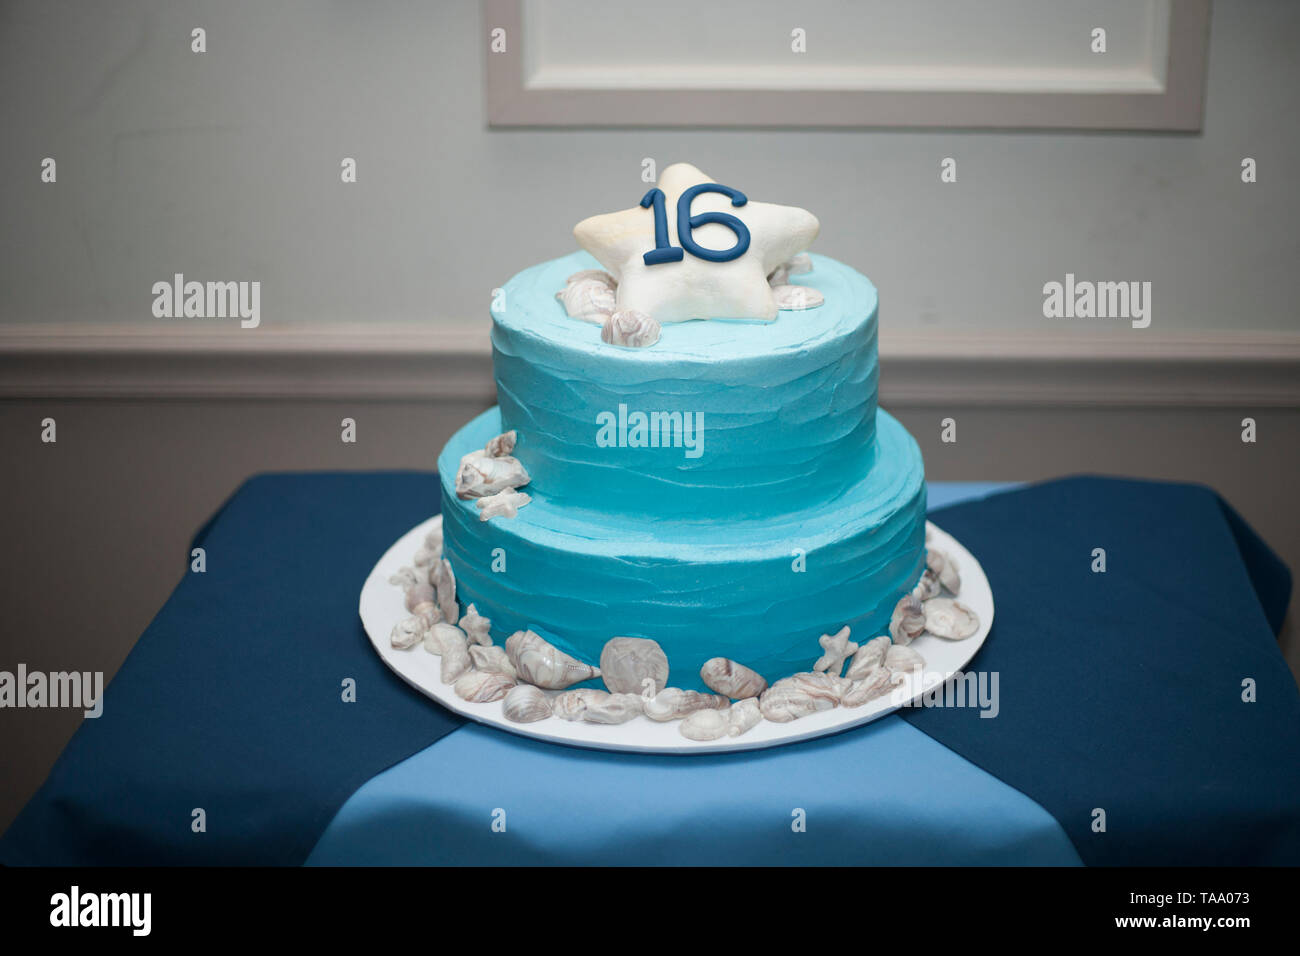 https://c8.alamy.com/comp/TAA073/sweet-16-double-tiered-birthday-cake-with-light-blue-frosting-TAA073.jpg